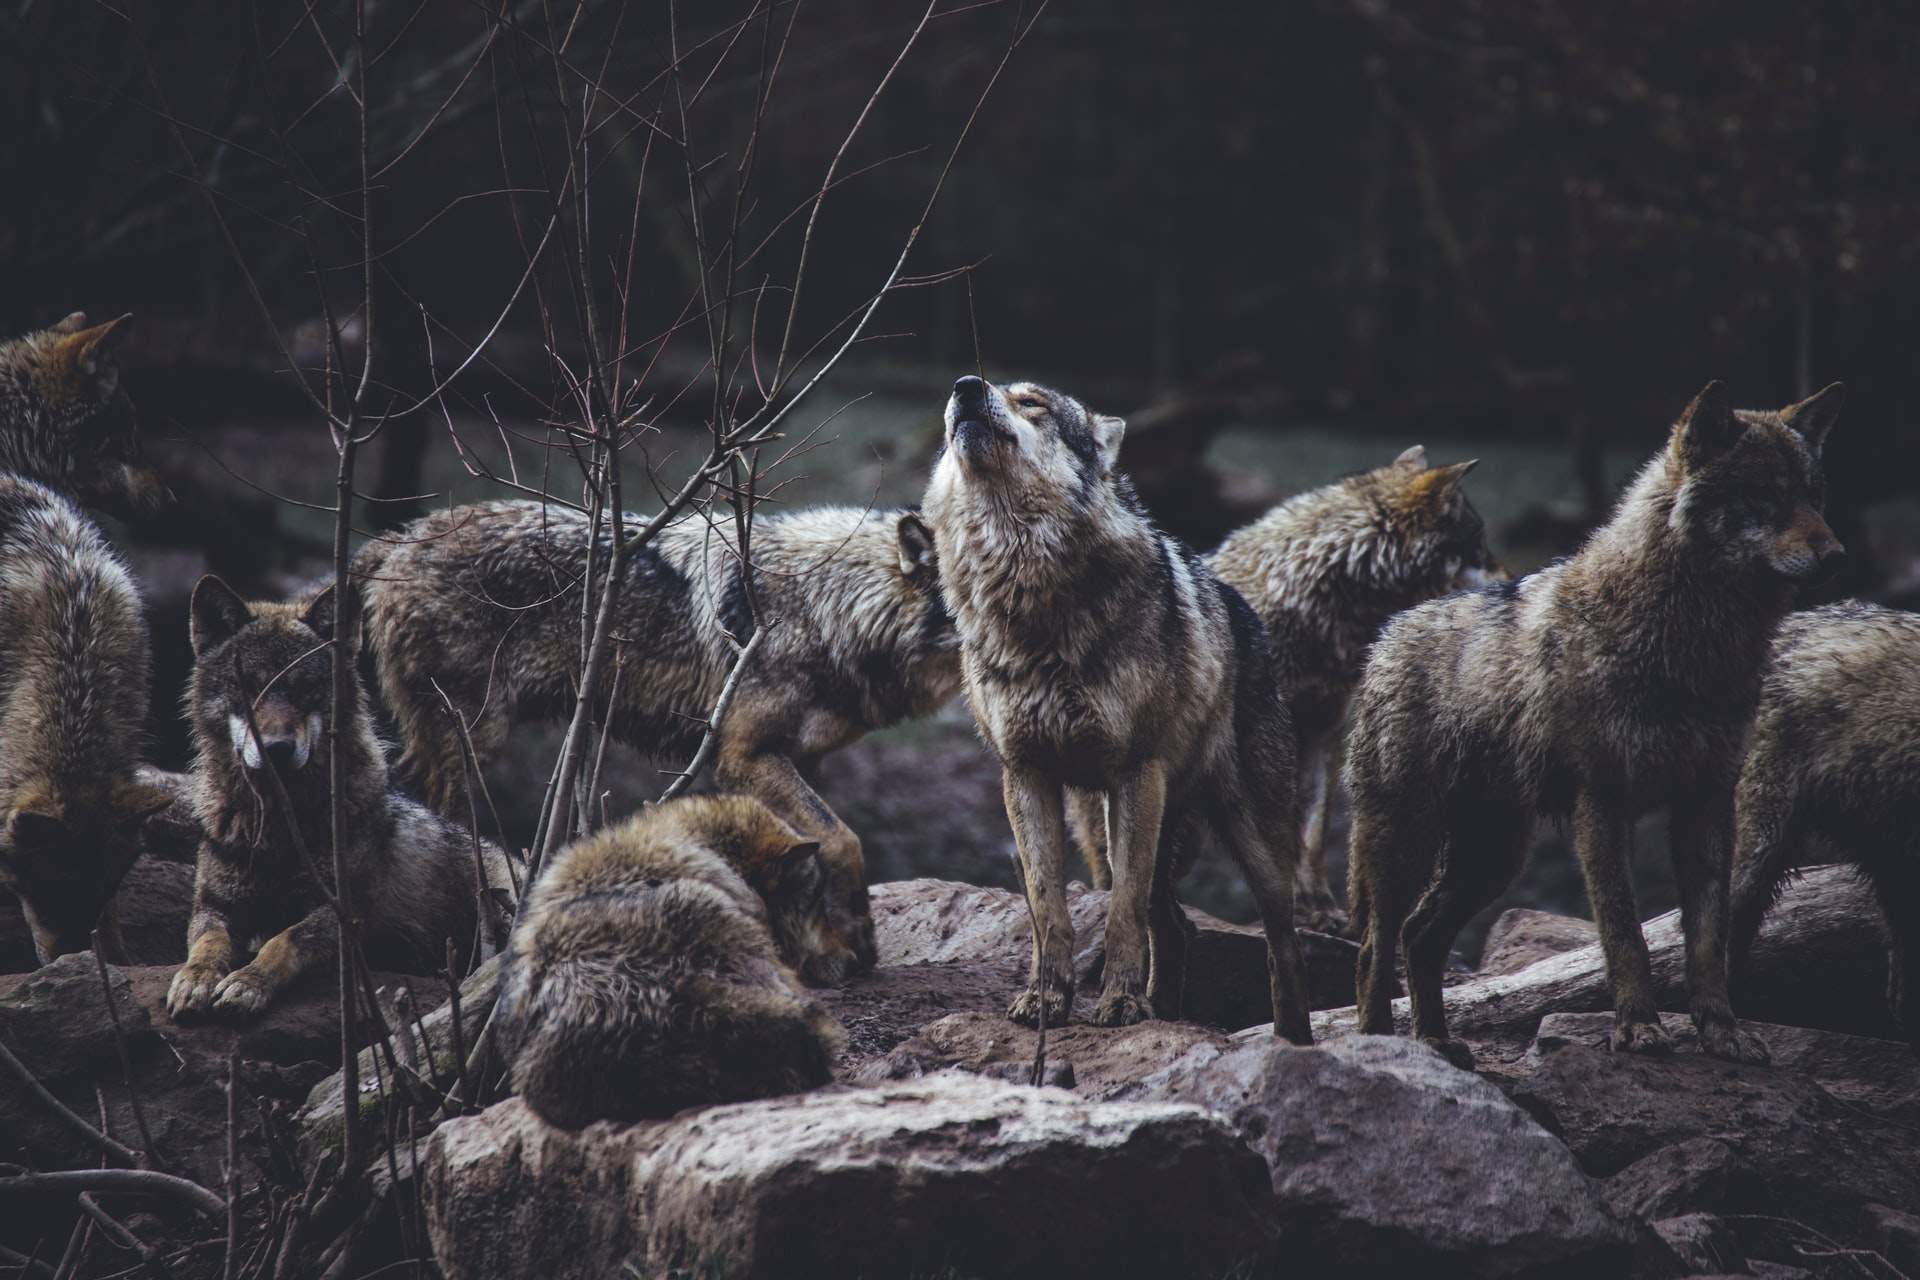 You are currently viewing Reward  Heightened for Information Regarding Wolf Pack Poisoning